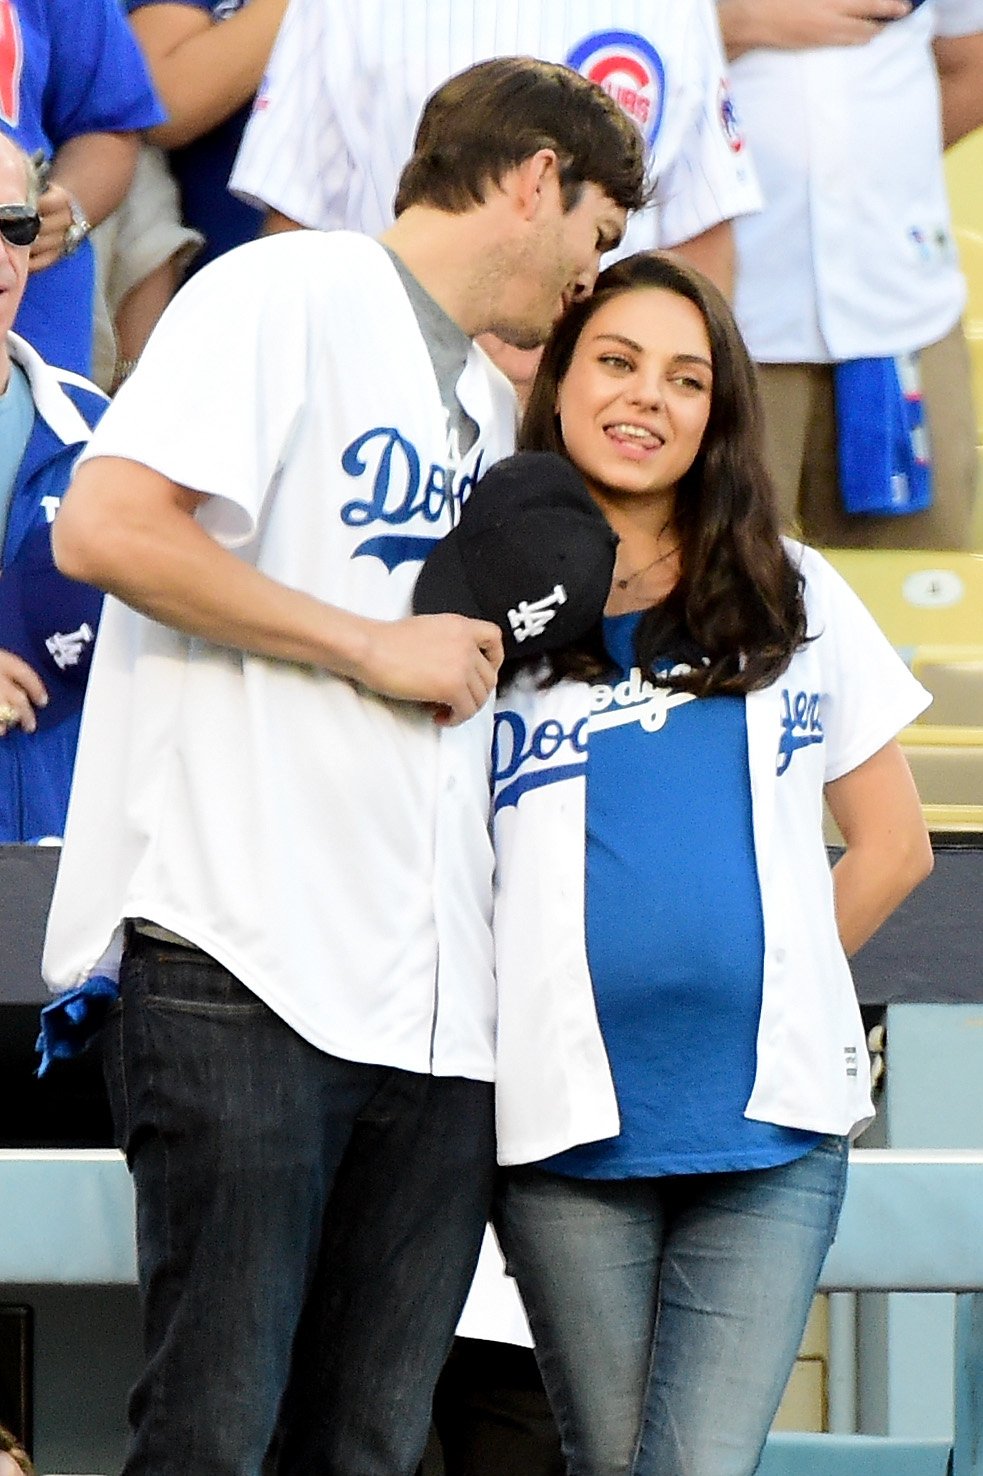 Ashton Kutcher and wife Mila Kunis on the field after they announced the Los Angeles Dodgers starting lineup before game four of the National League Championship Series against the Chicago Cubs at Dodger Stadium on October 19, 2016 in Los Angeles, California | Photo: Getty Images